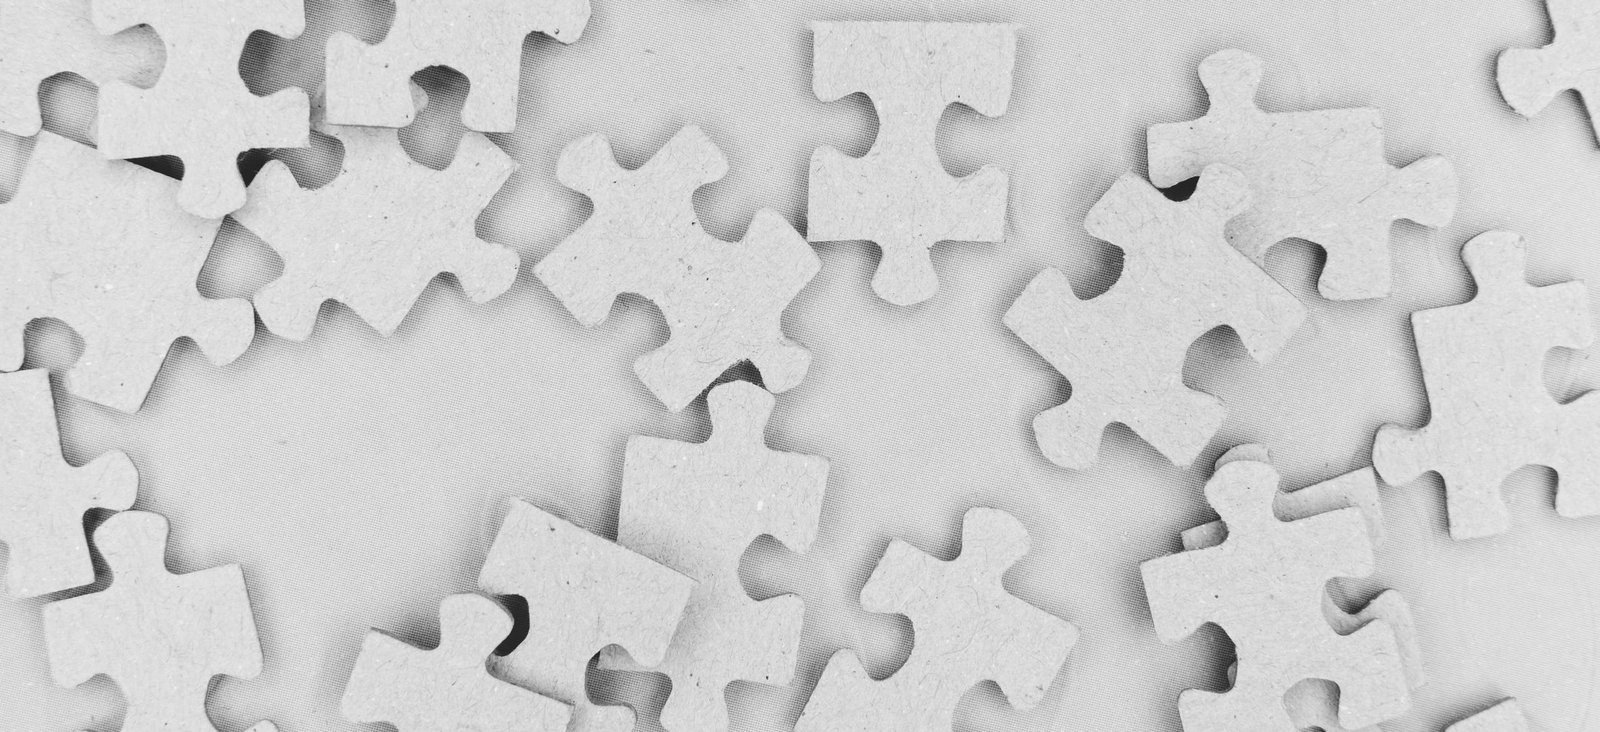 Gray generic puzzle pieces scattered against a gray background